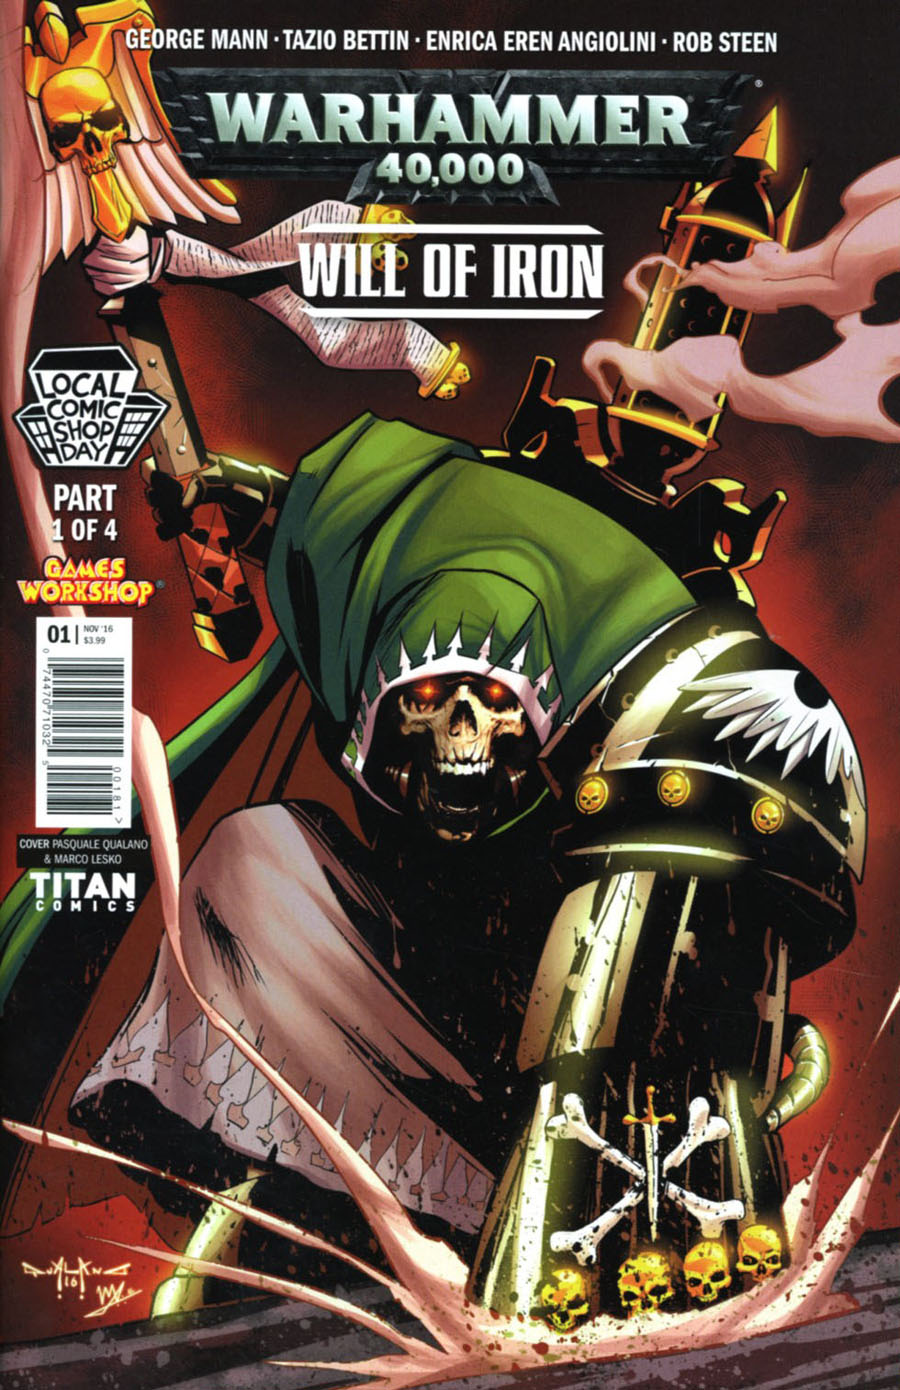 LCSD 2016 Warhammer 40000 Will Of Iron #1 Variant Pasquale Qualano Cover